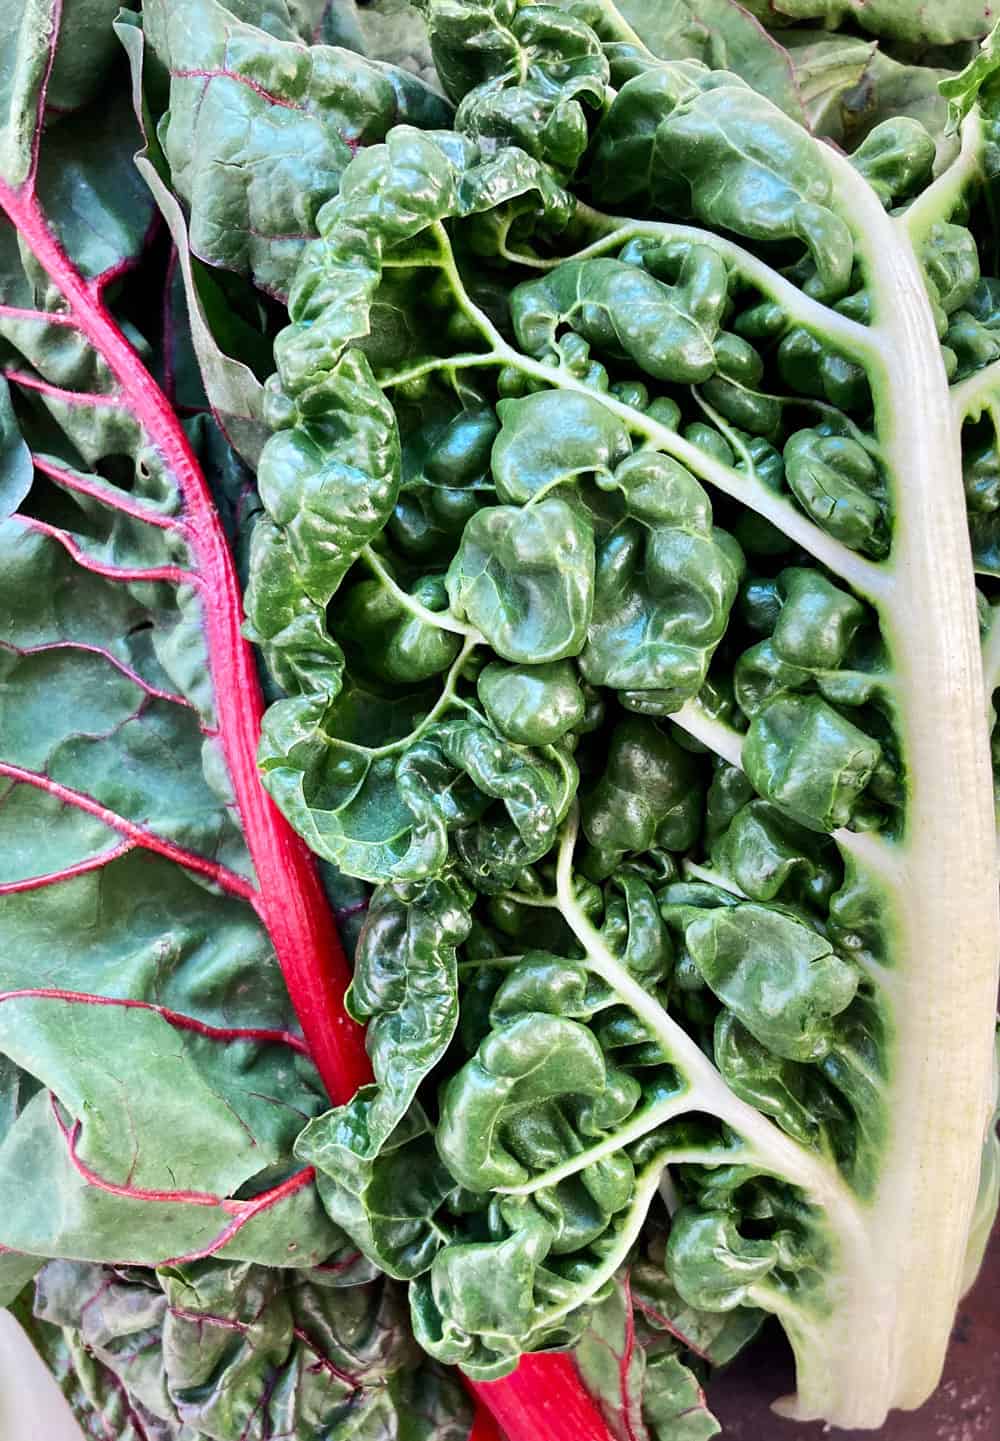 stalks of red and white (Swiss) chard